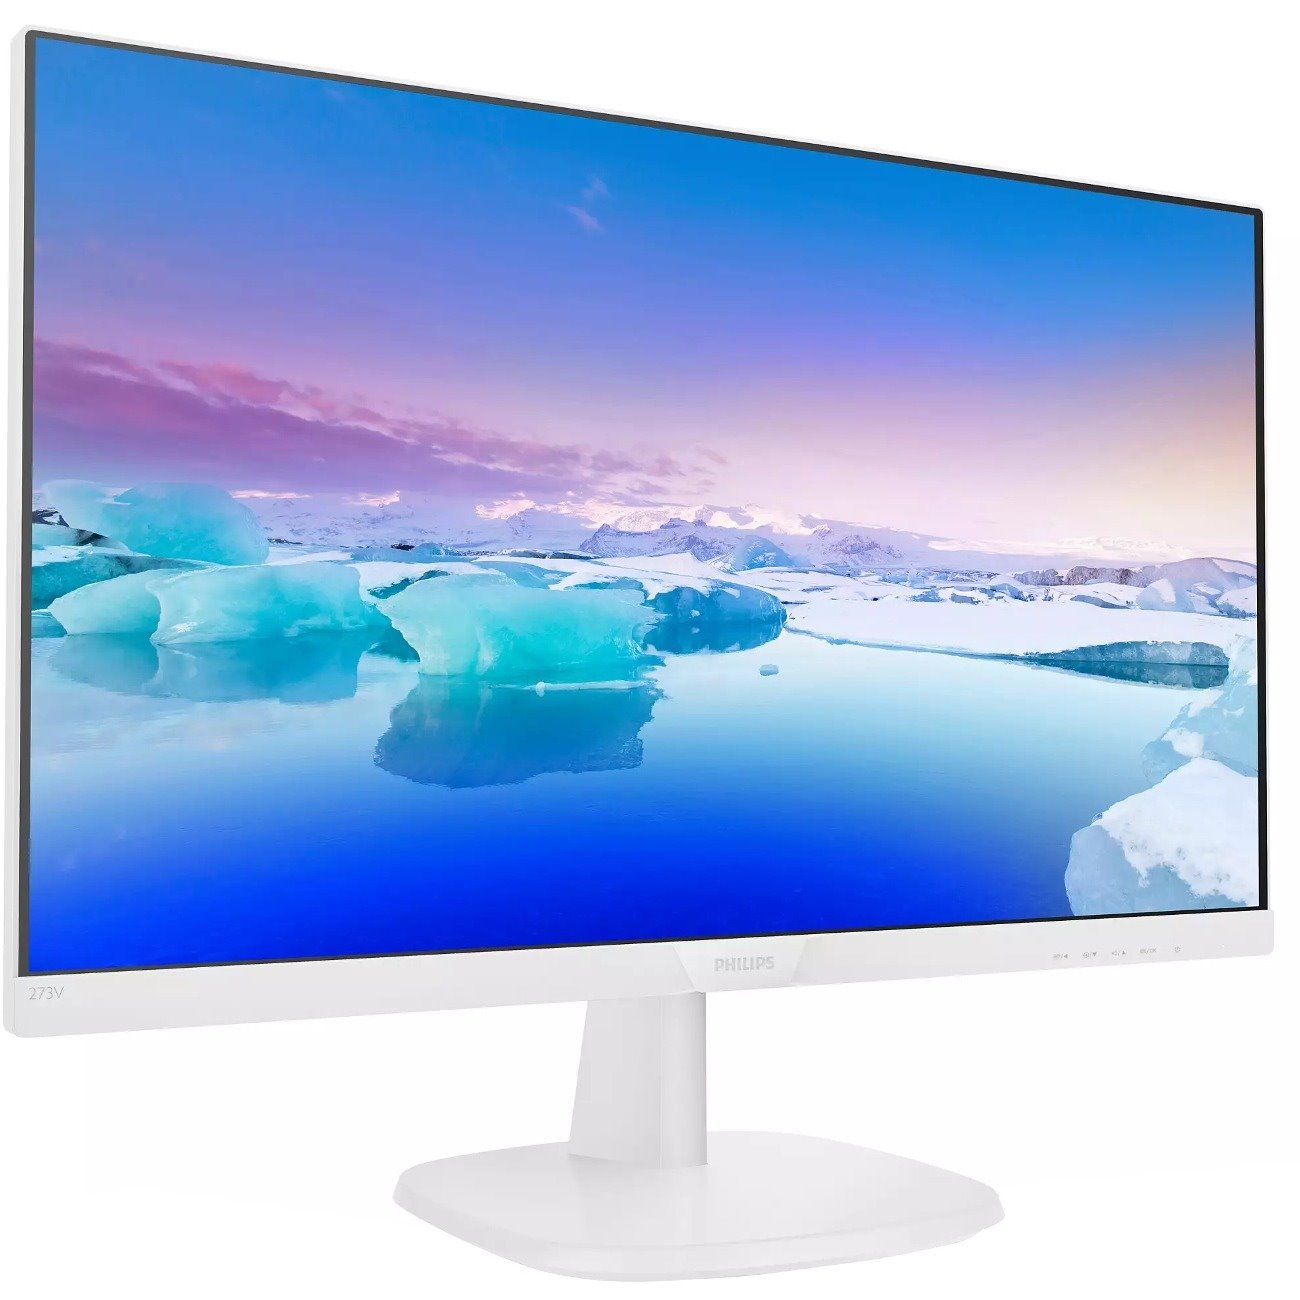 Philips 273V7QDAW 68.6 cm (27") Full HD WLED LCD Monitor - 16:9 - Textured White